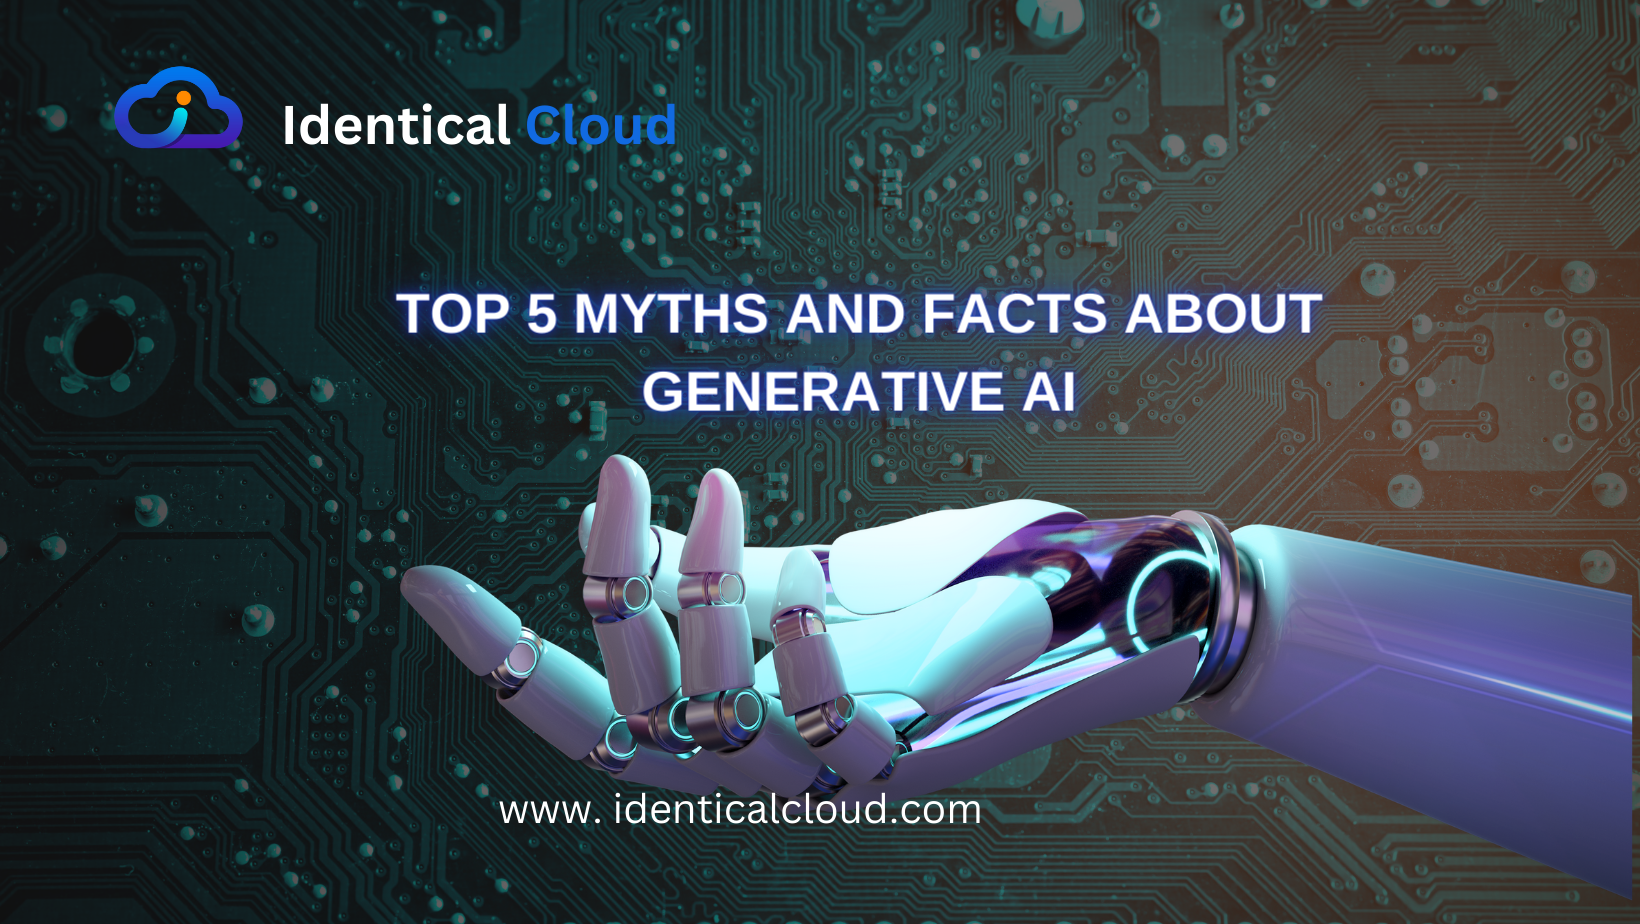 Top 5 Myths and Facts About Generative AI - identicalcloud.com